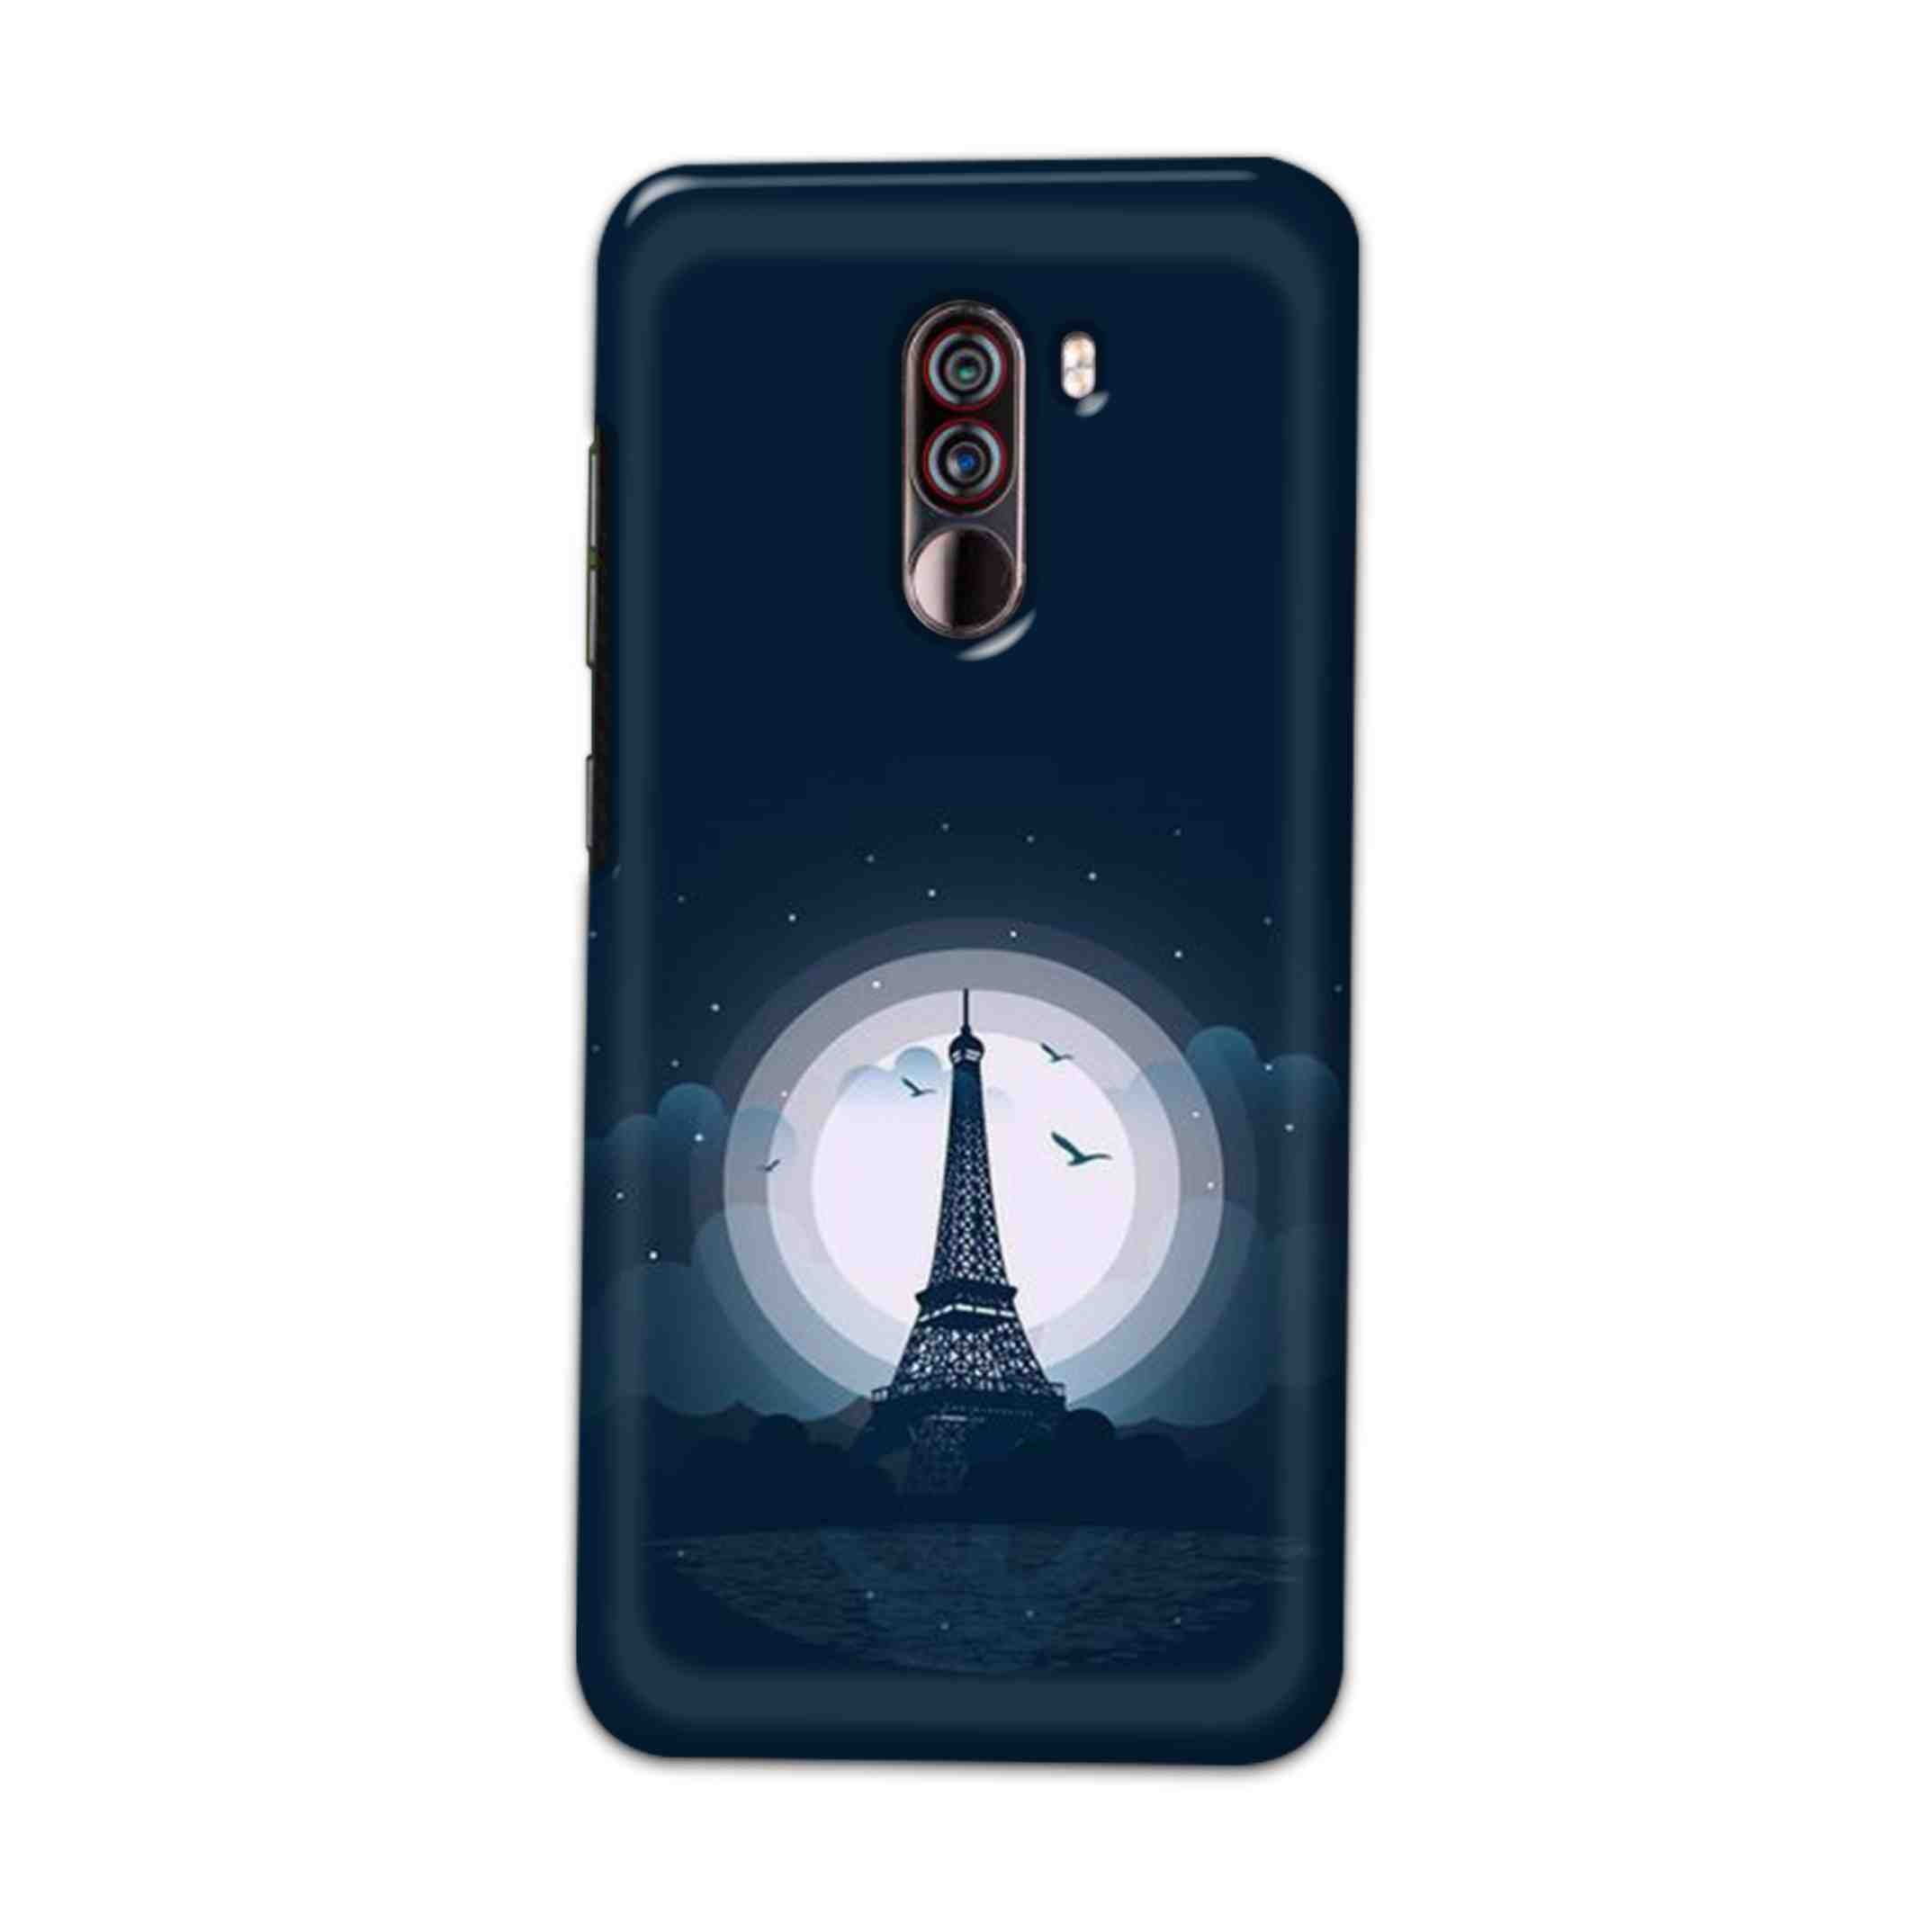 Buy Paris Eiffel Tower Hard Back Mobile Phone Case Cover For Xiaomi Pocophone F1 Online